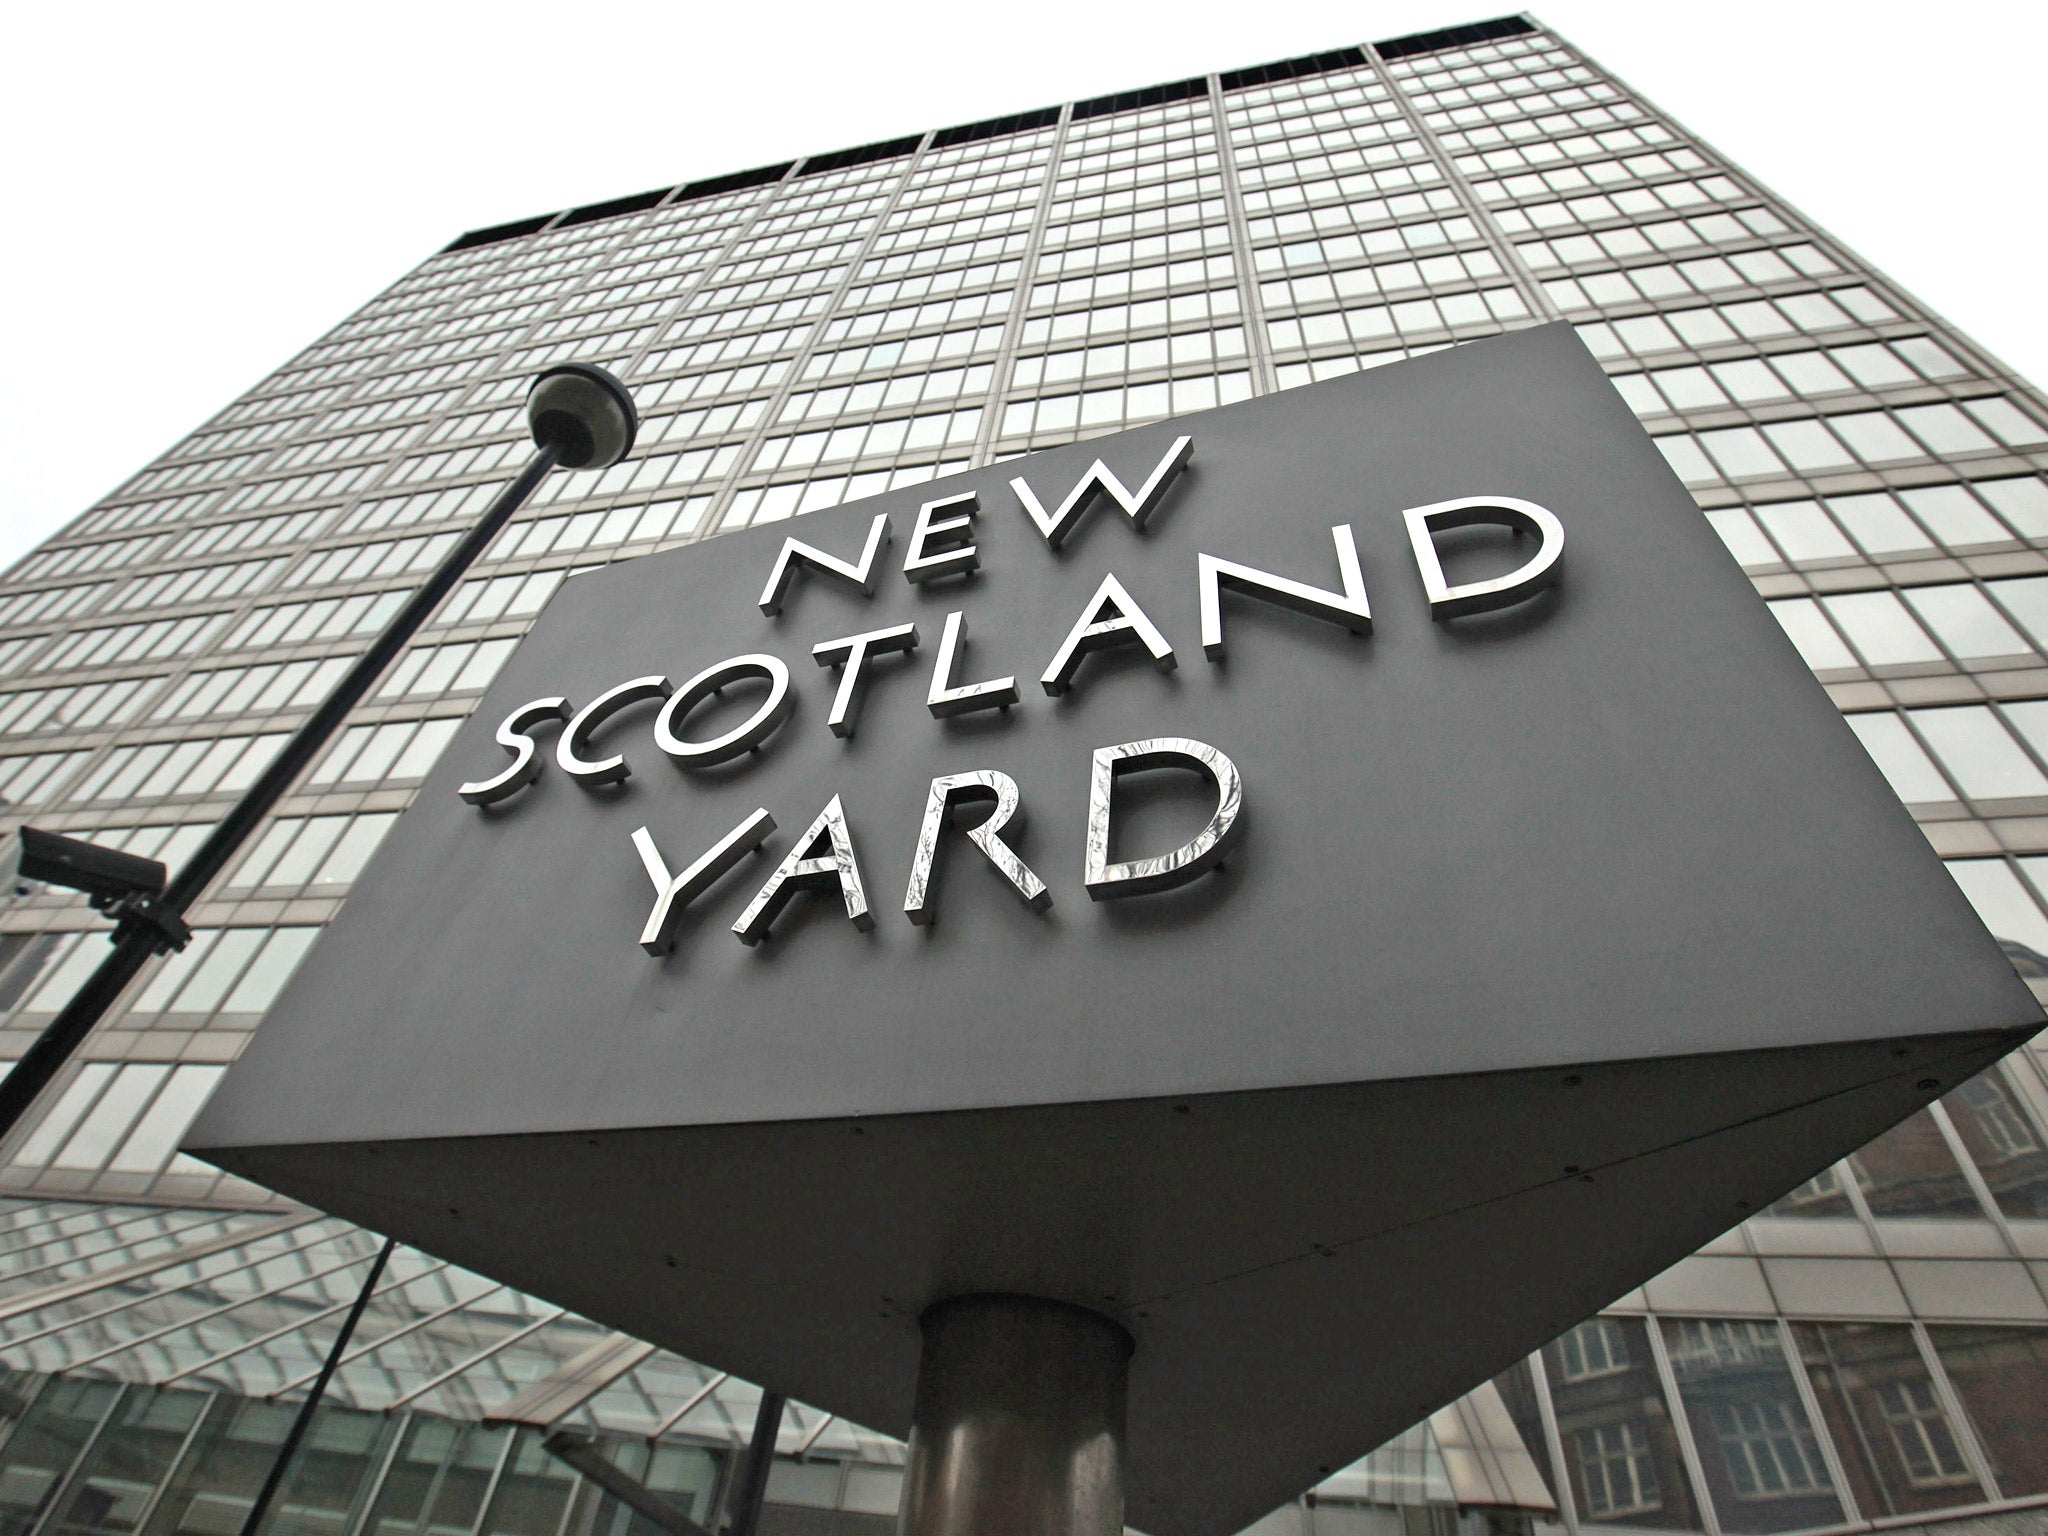 Scotland Yard has been accused of being complicit in torture for failing to investigate the UK’s role in alleged war crimes